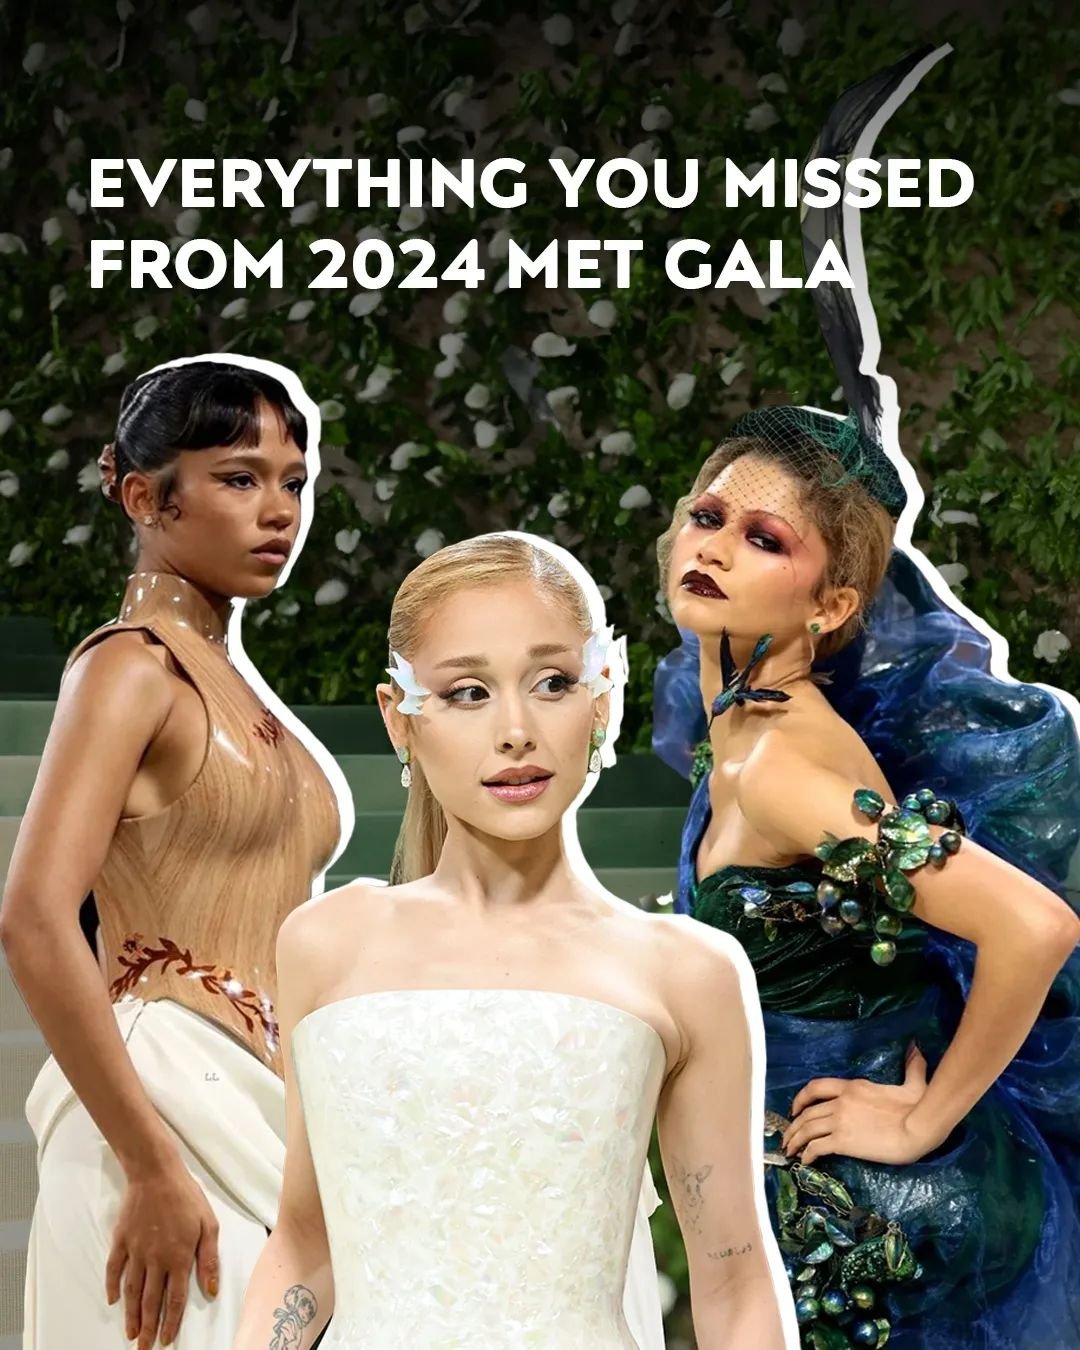 Step into 'The Garden of Time' 🌸 
 
Here's your exclusive peek at all the unforgettable moments from the 2024 Met Gala. From jaw-dropping fashion to all the gossip, we've got the scoop on everything you missed. 
 
Share in the comments your favorite